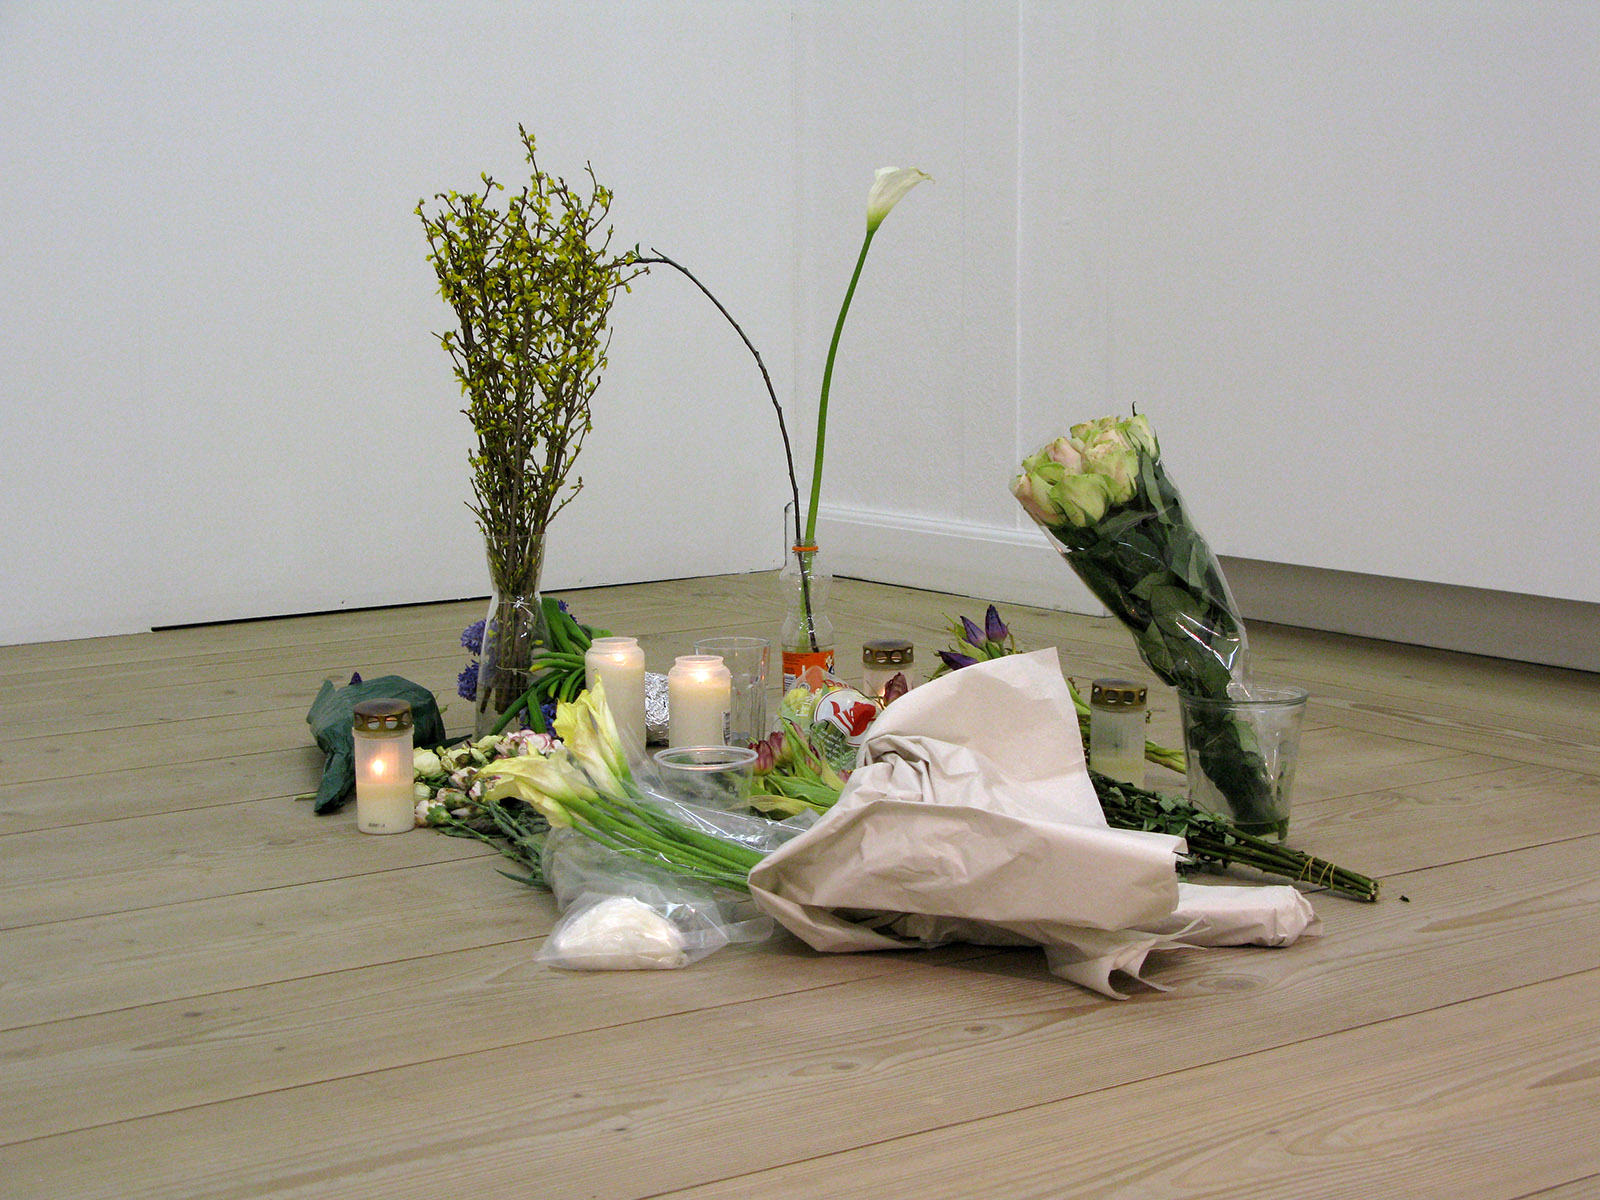 Documentation of the work 'Untitled (Spontaneous Amemorial)' by Dan Stockholm